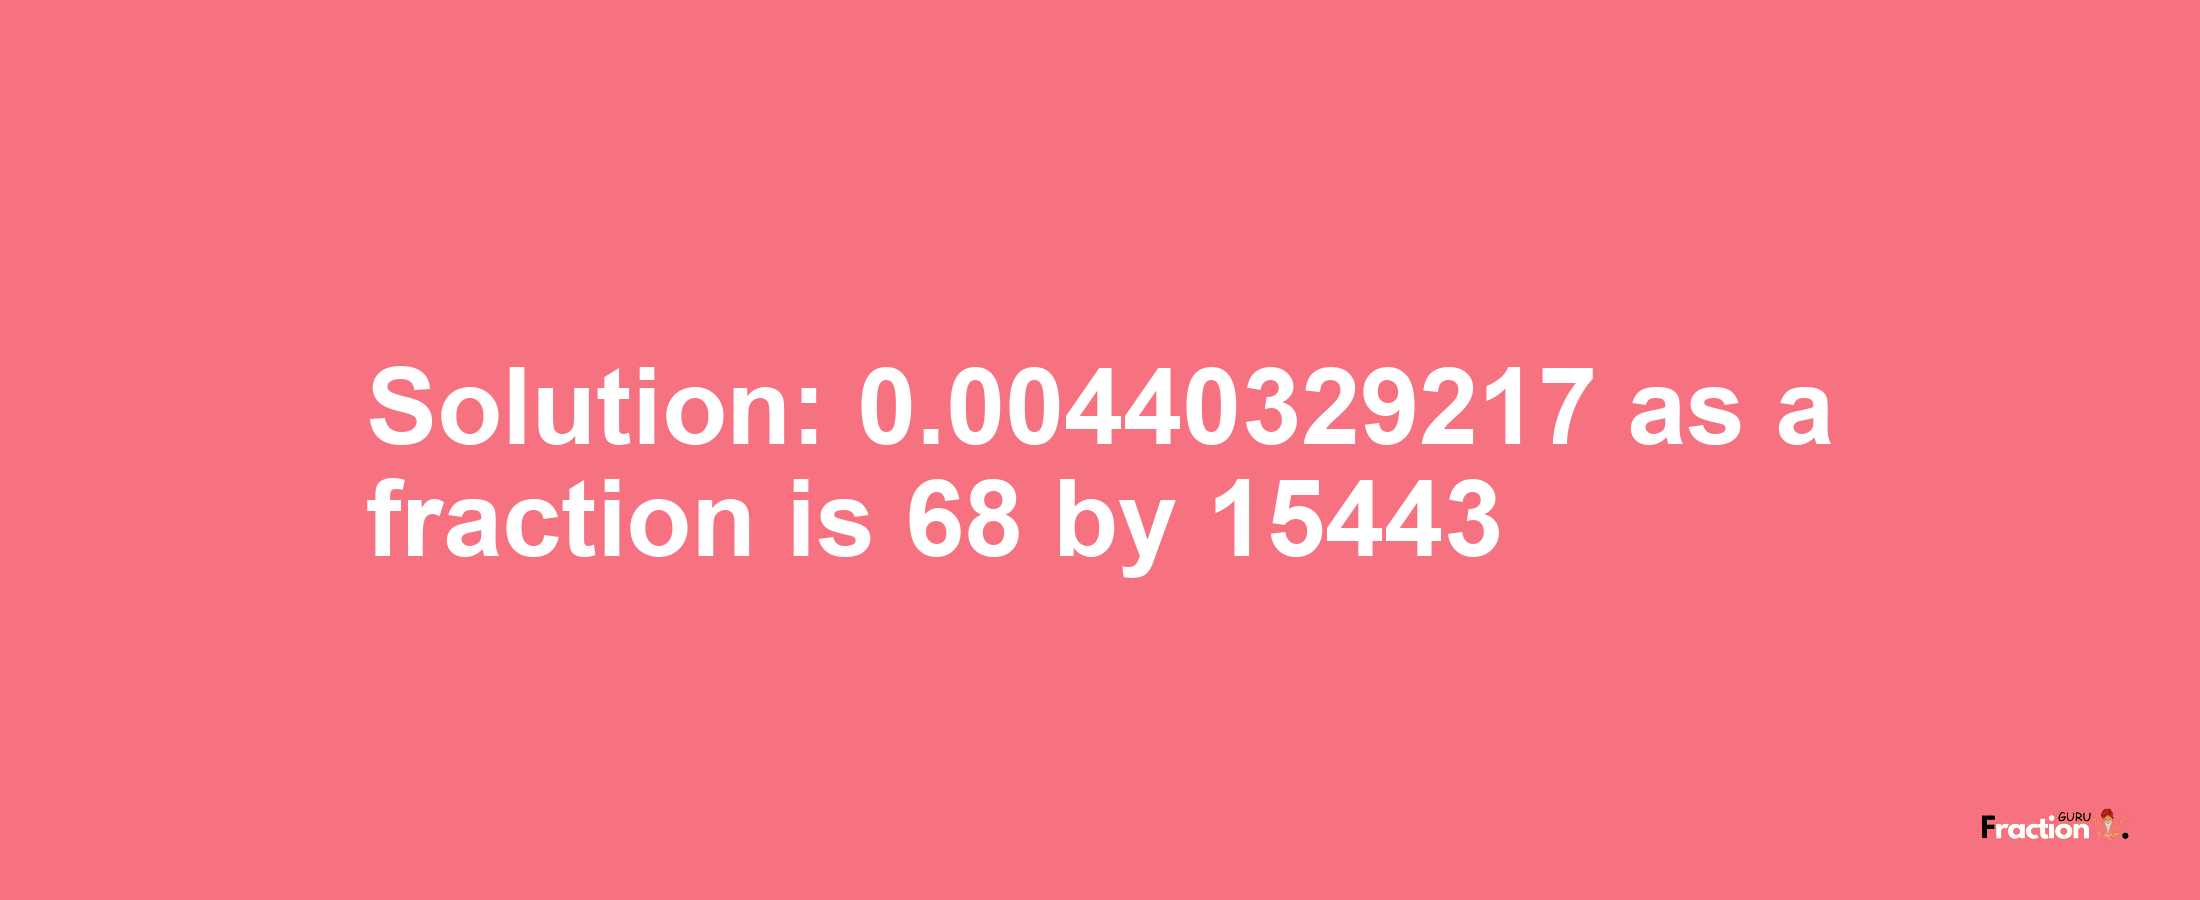 Solution:0.00440329217 as a fraction is 68/15443